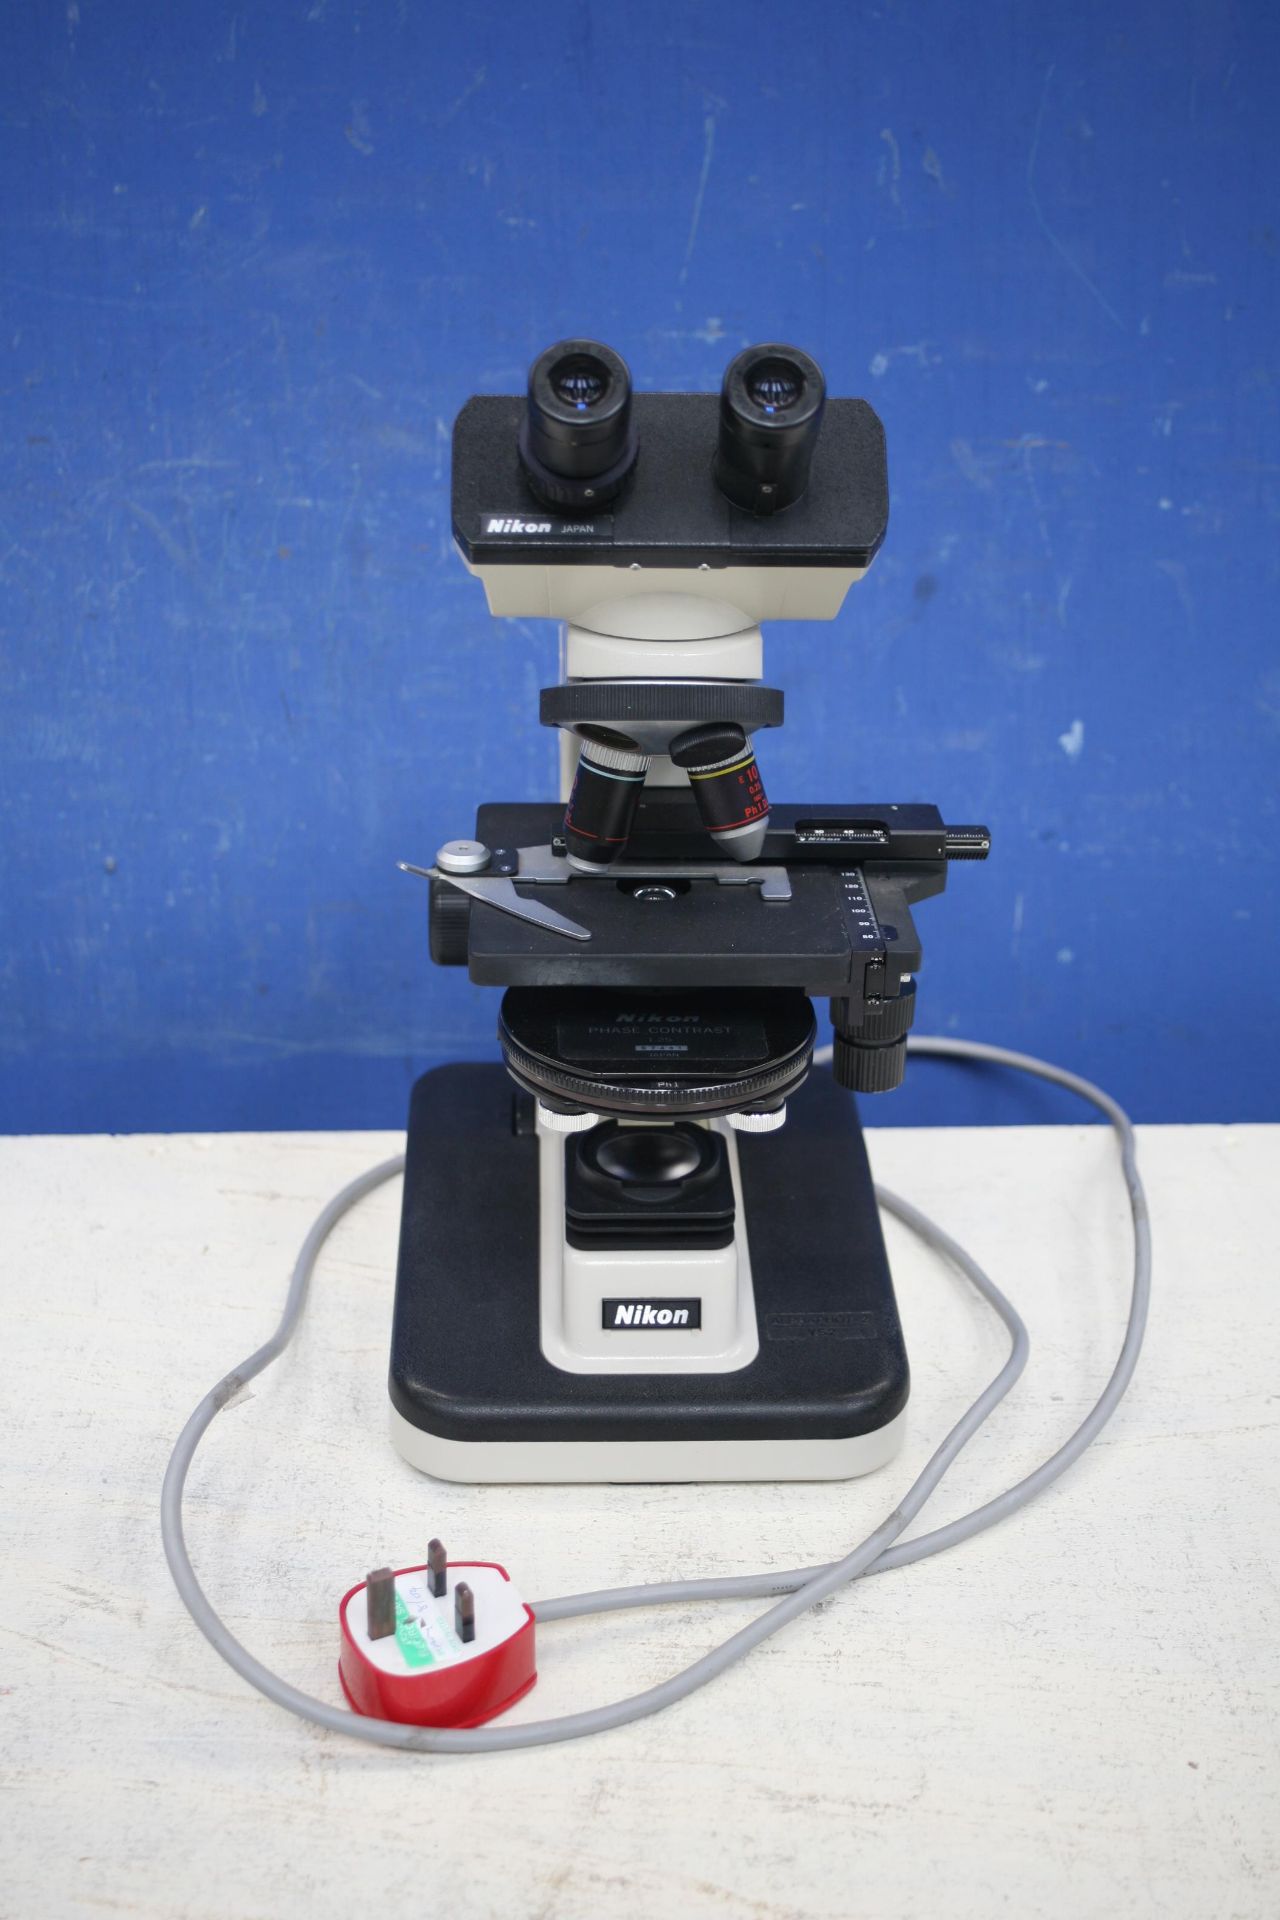 Zeiss Technival 2 Table Top Microscope And Nikon Table Top Microscope - Image 2 of 2